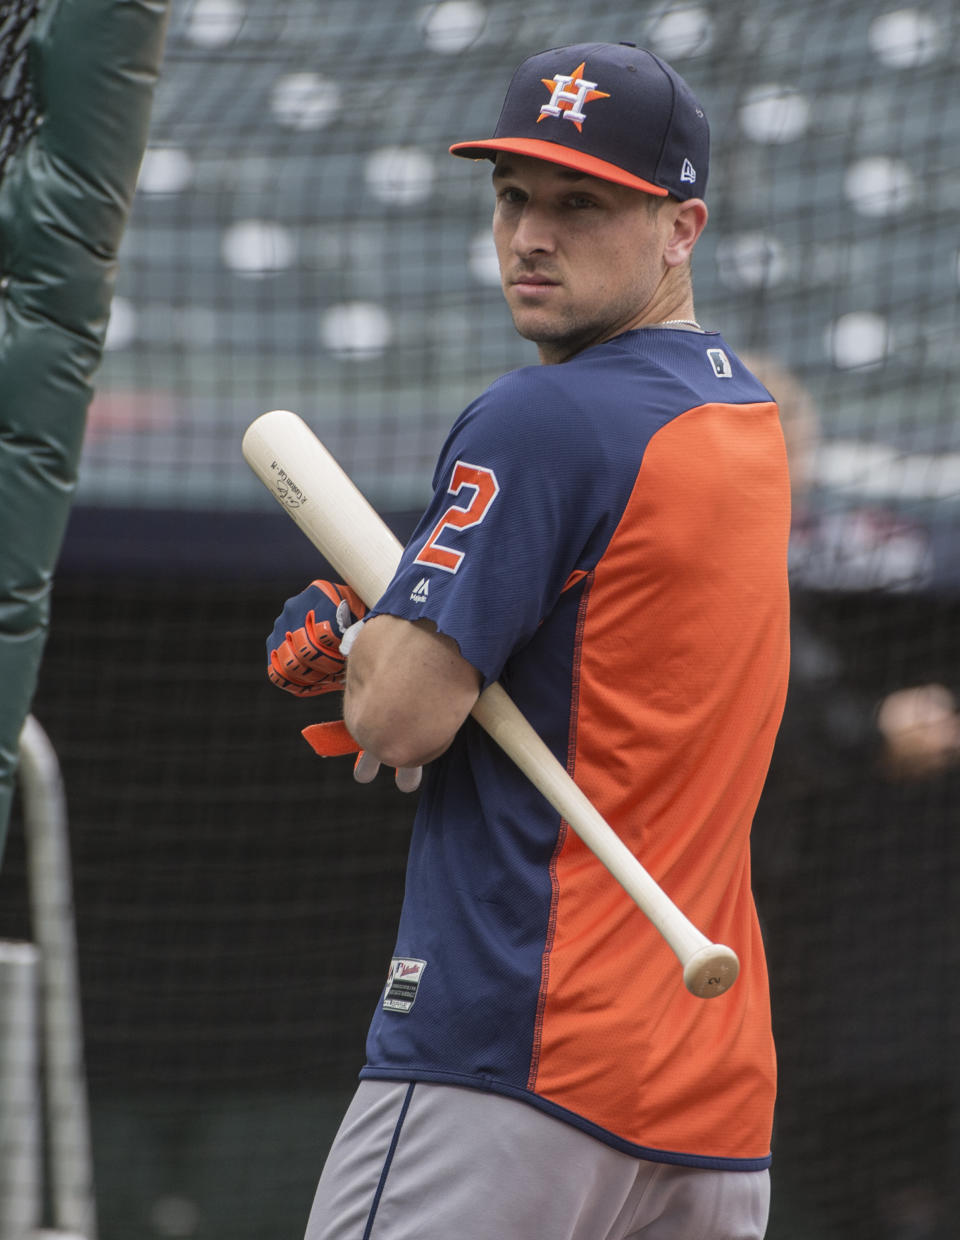 Houston Astros' Alex Bregman walks to the batting cage during a workout in Cleveland, Sunday, Oct. 7, 2018. The Astros are to play the Cleveland Indians in the third game of their ALDS series, Monday. (AP Photo/Phil Long)